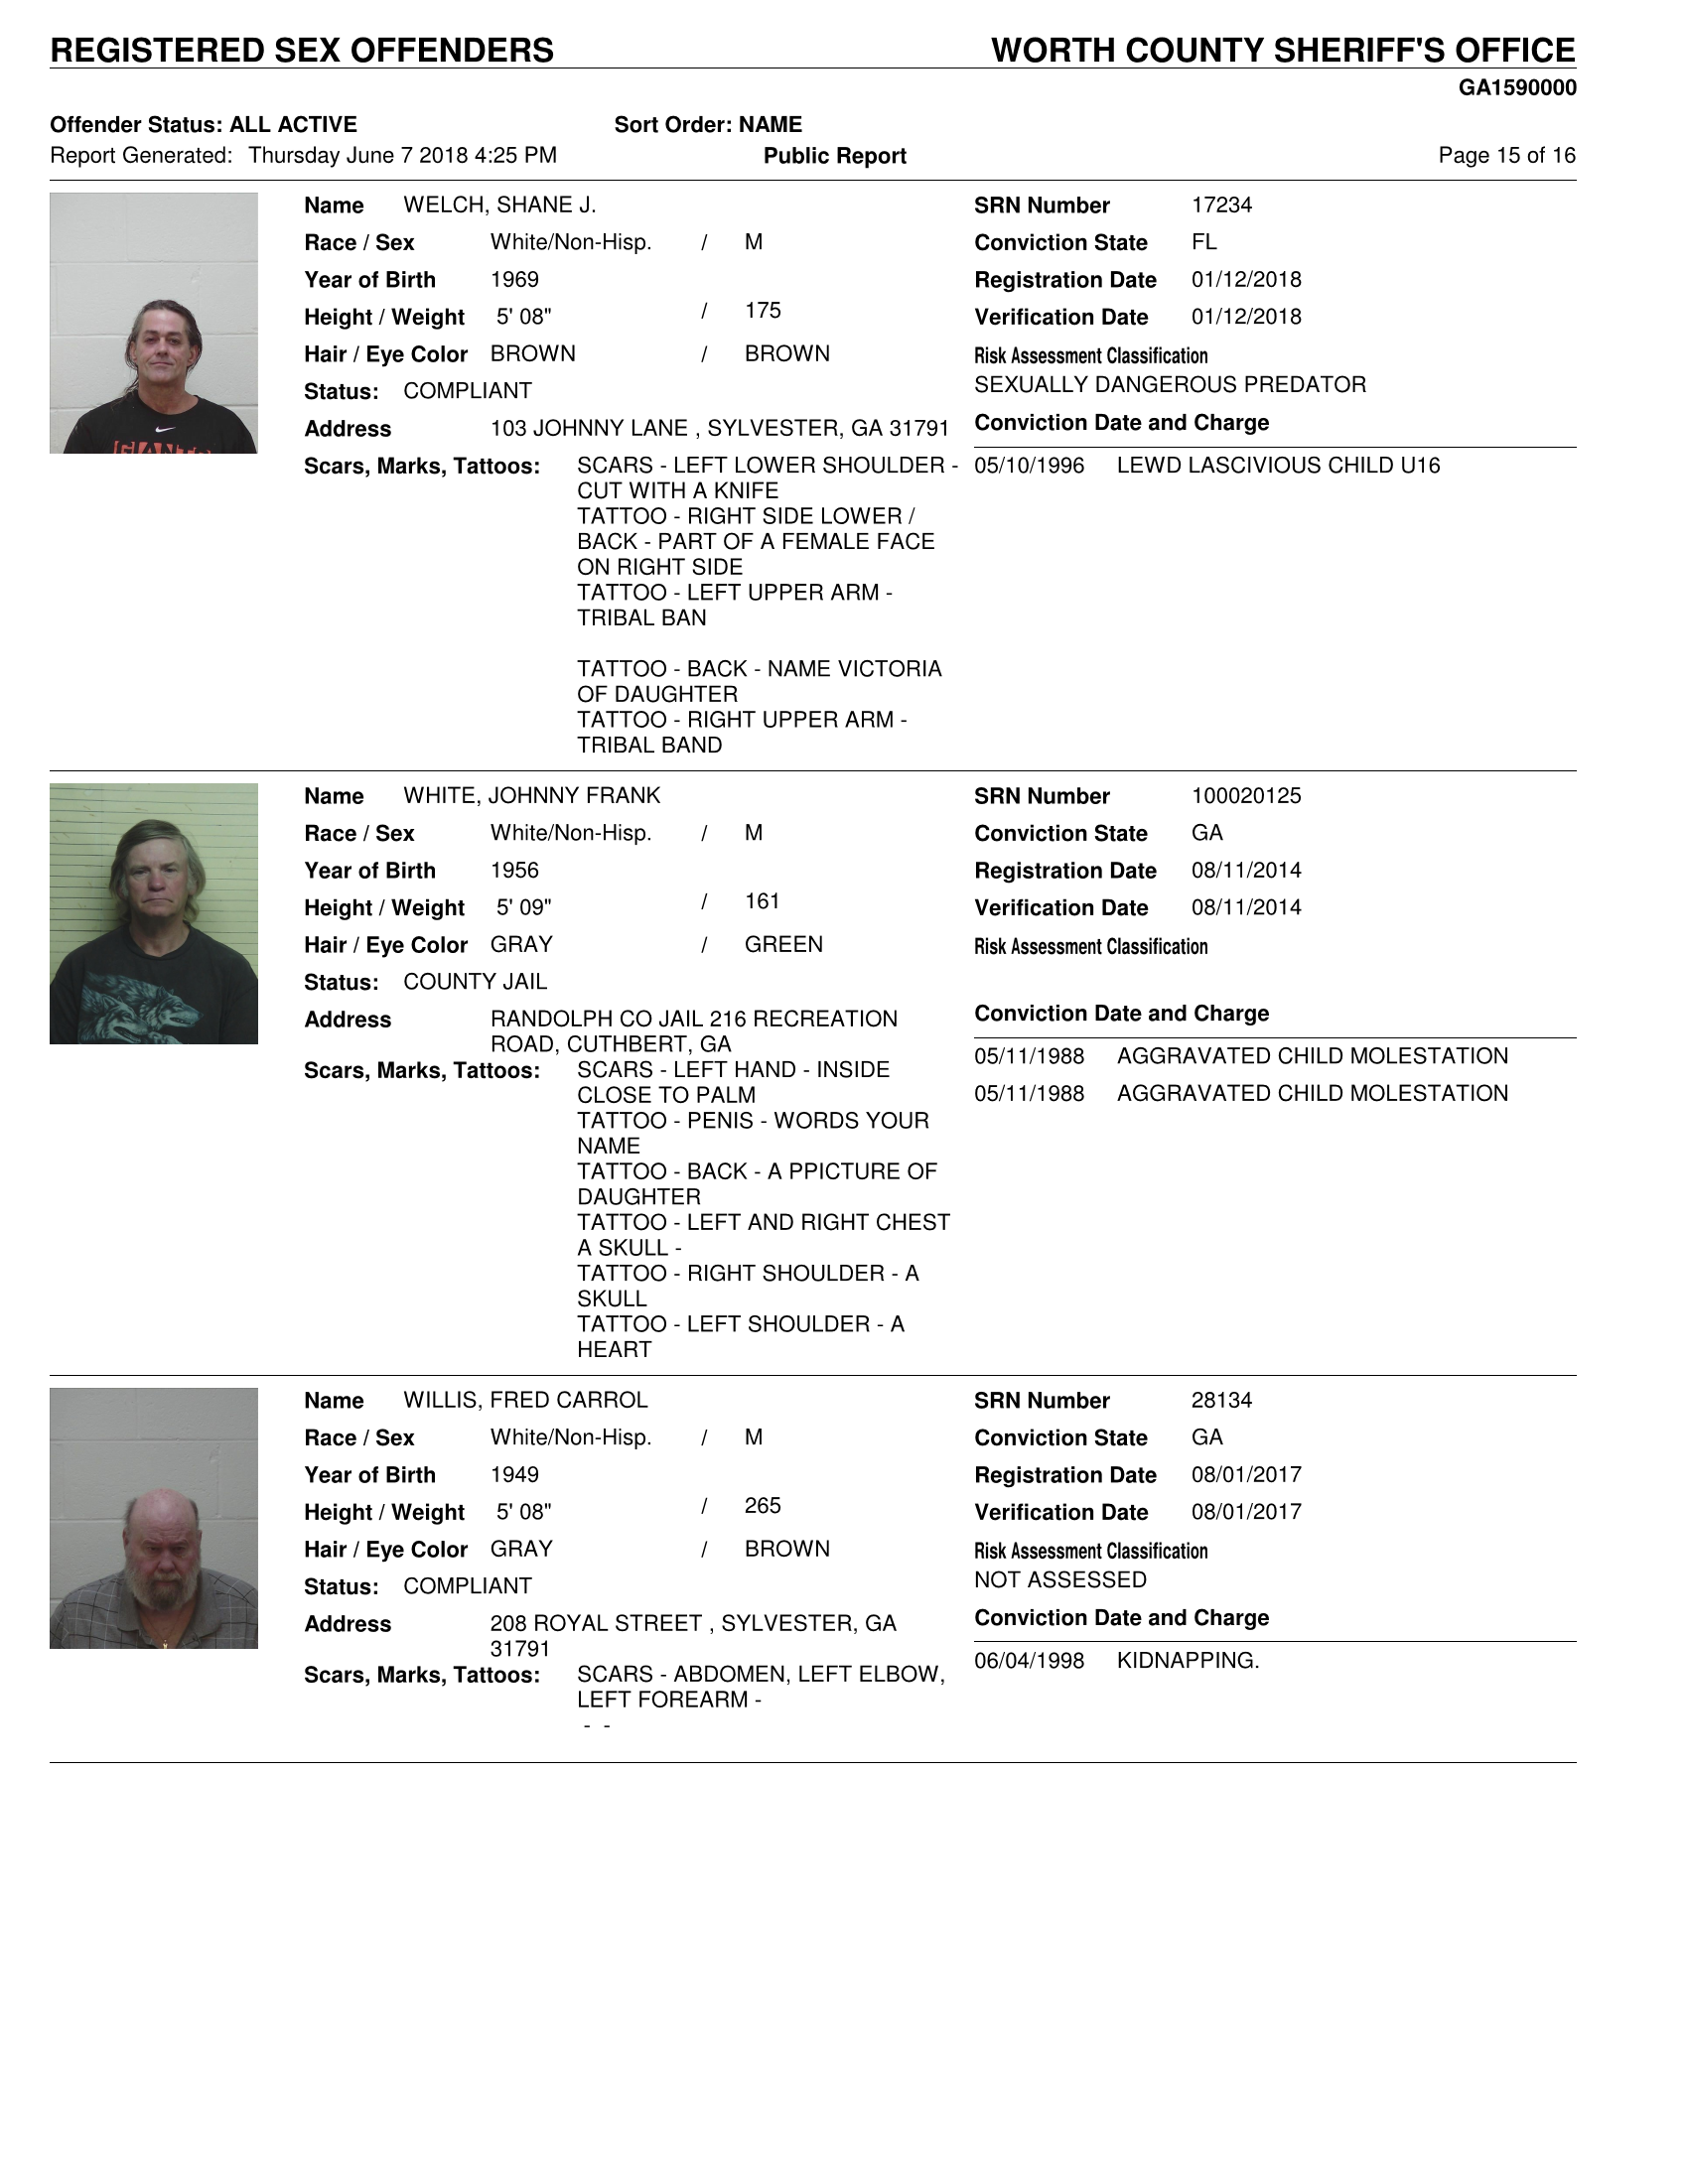 Sex Offenders Worth County Sheriff